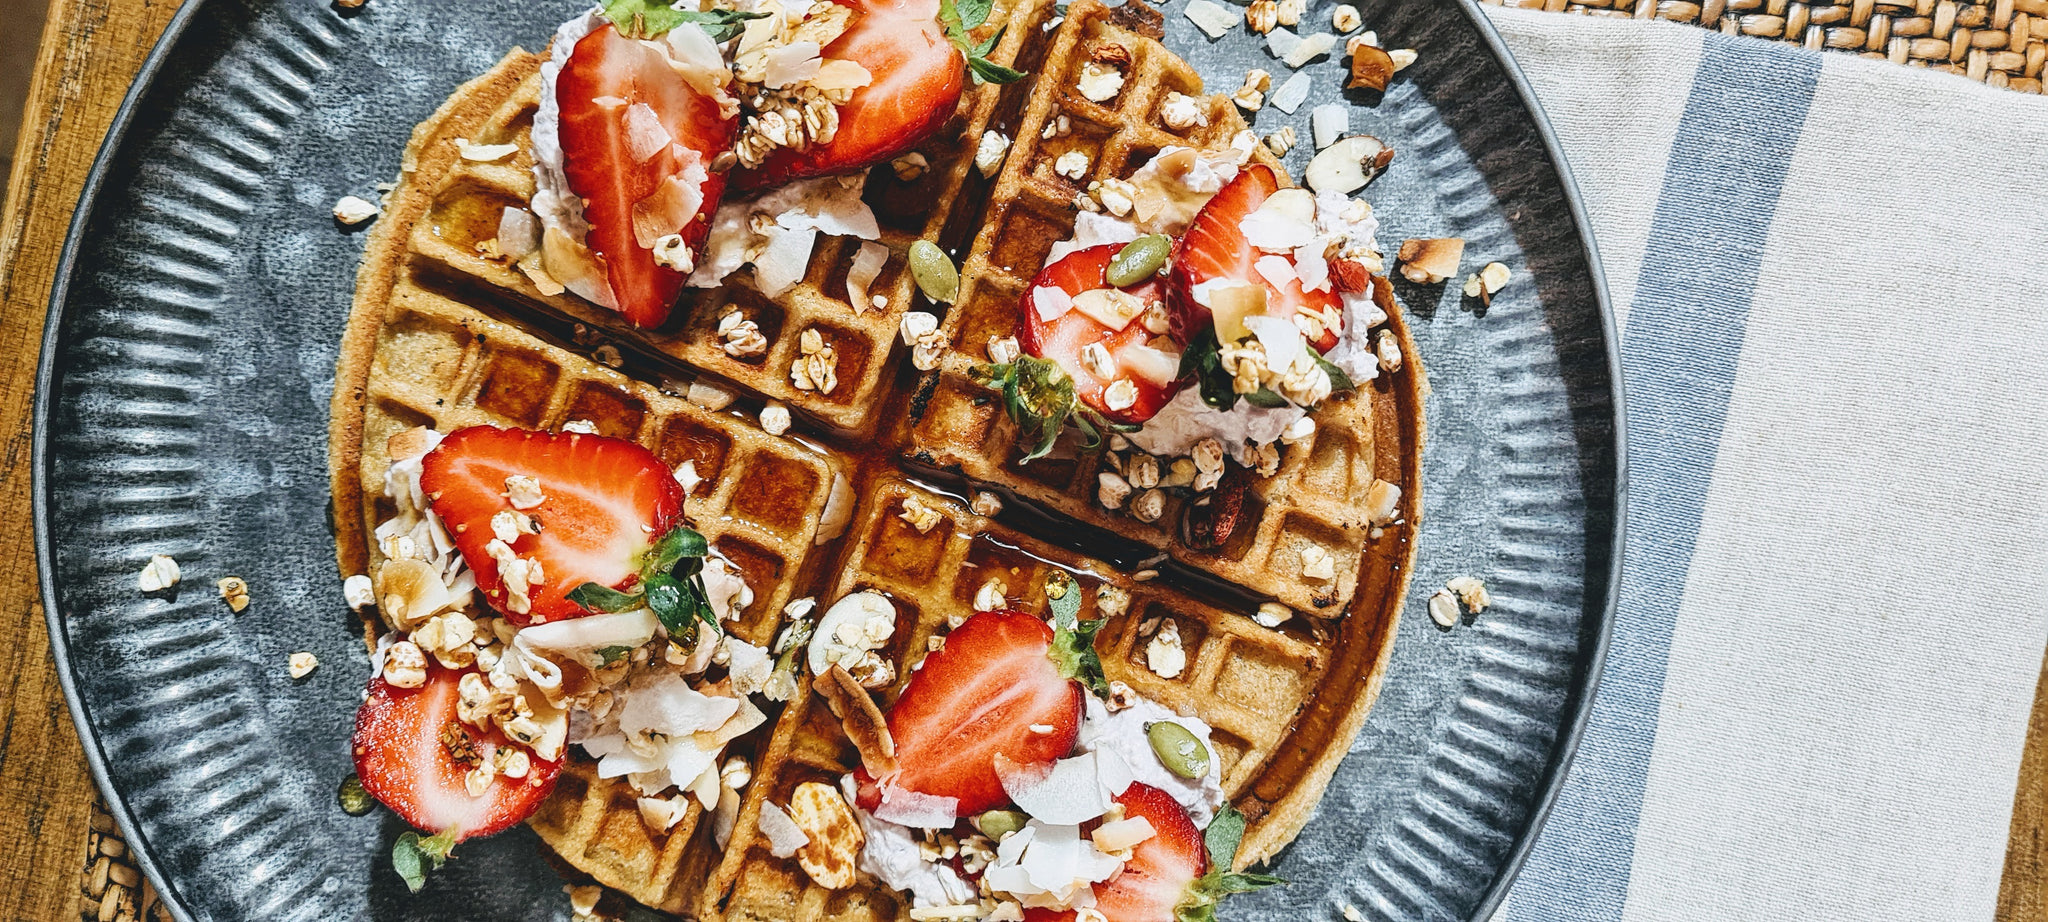 Vegan Coconut Waffles with Passionfruit Crunch & Maple